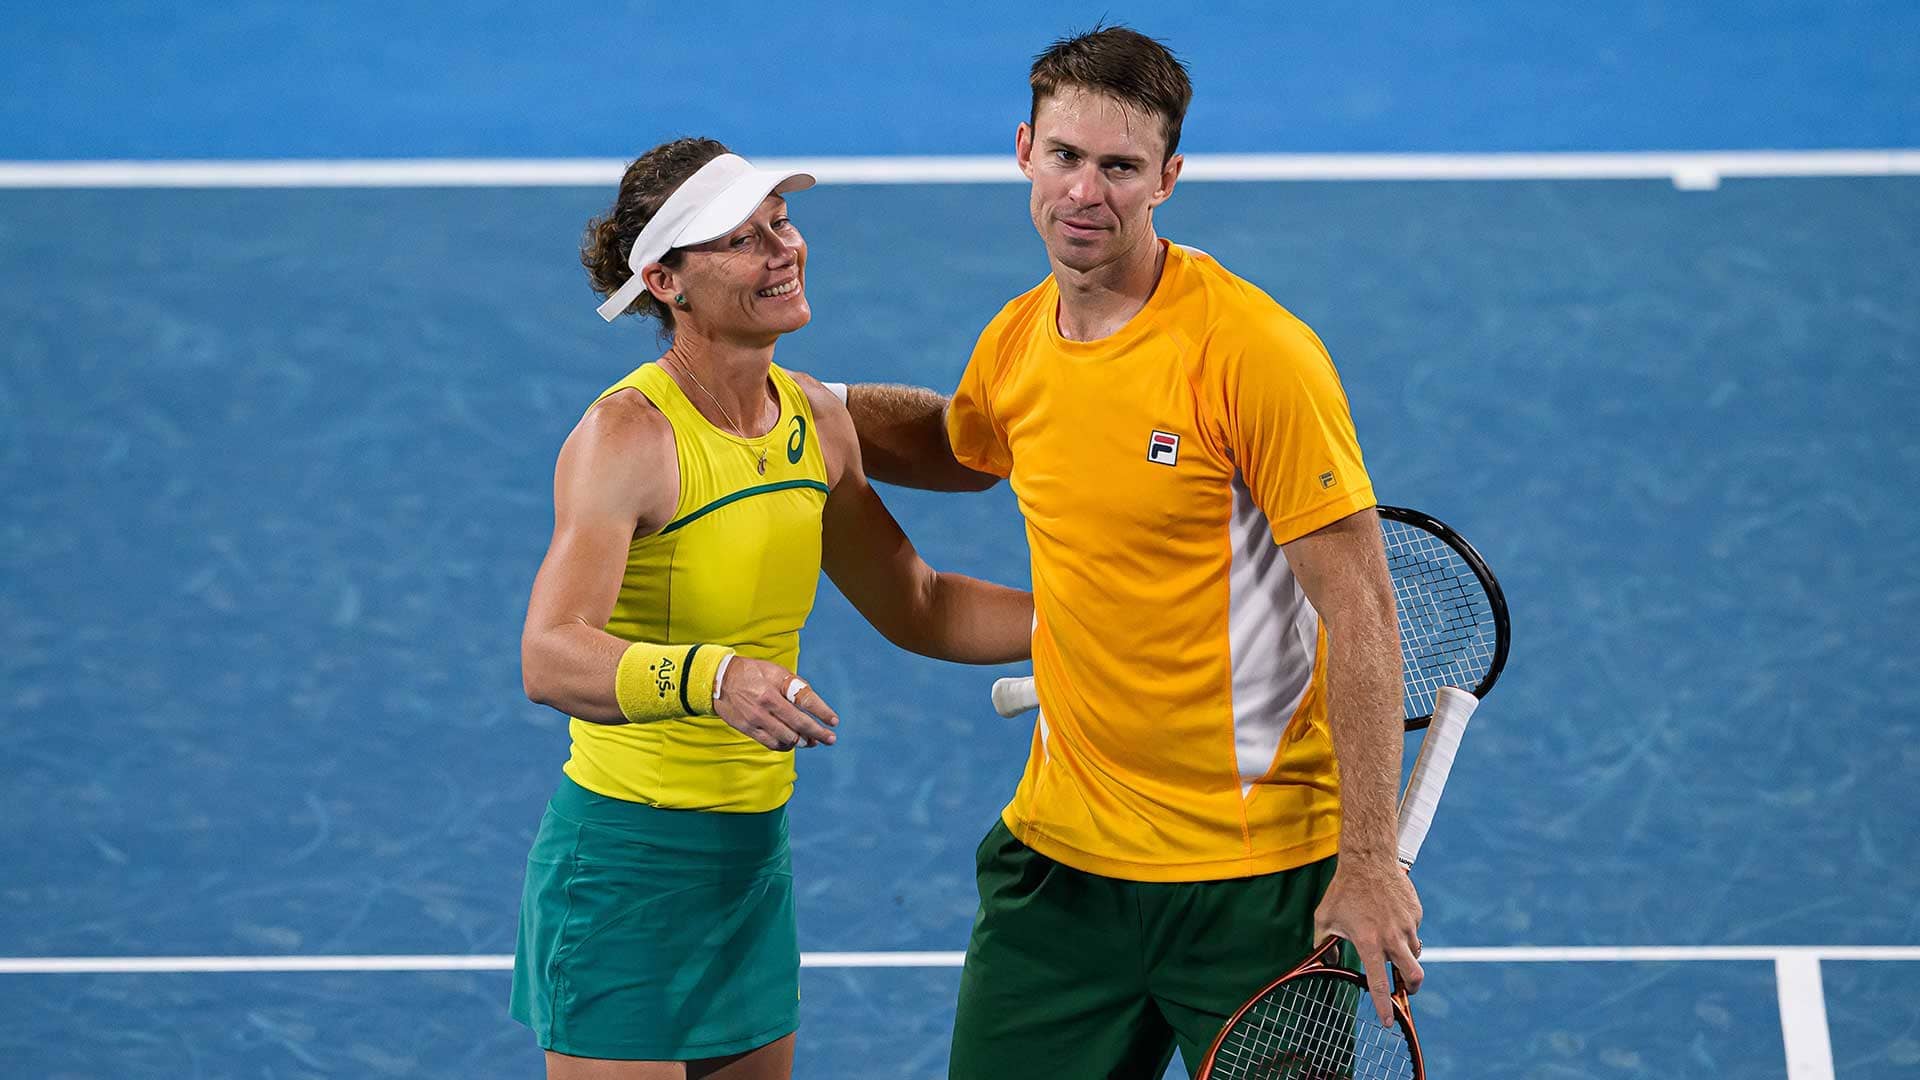 Samantha Stosur and John Peers win the tie for Australia.